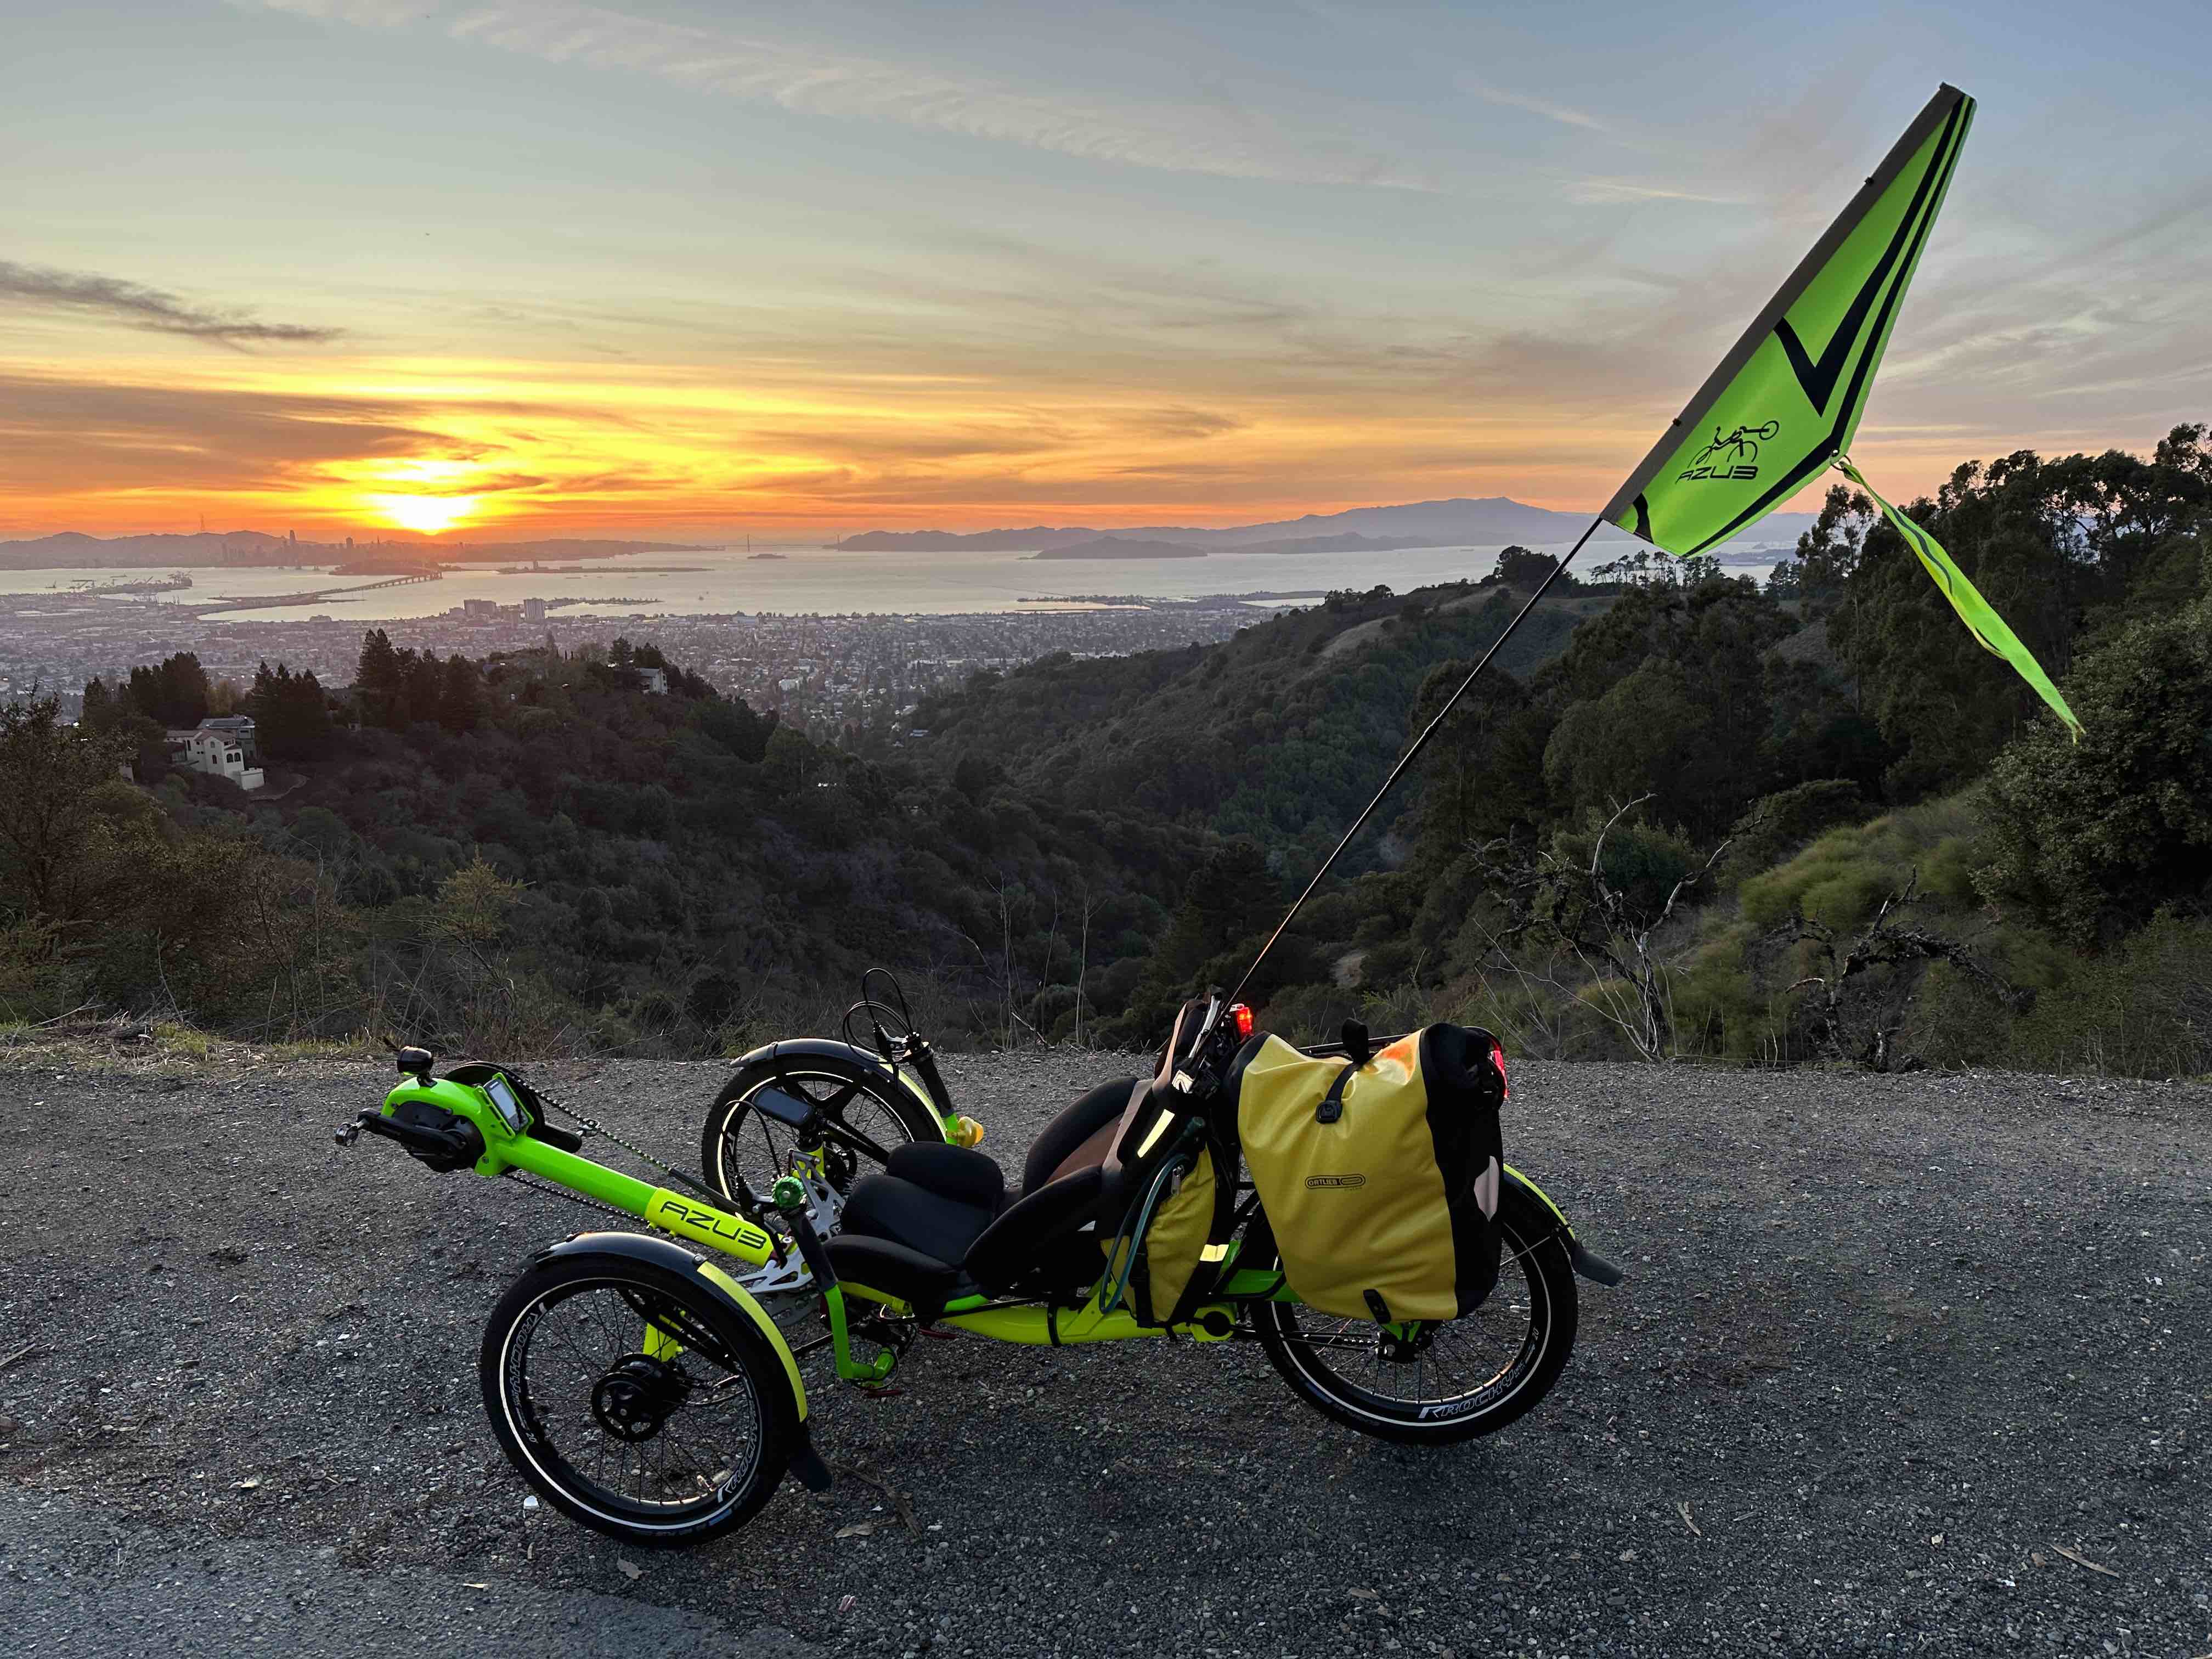 [Zach's photo of Azub Ti Fly 20 at viewpoint on Grizzly Peak Boulevard at sunset]